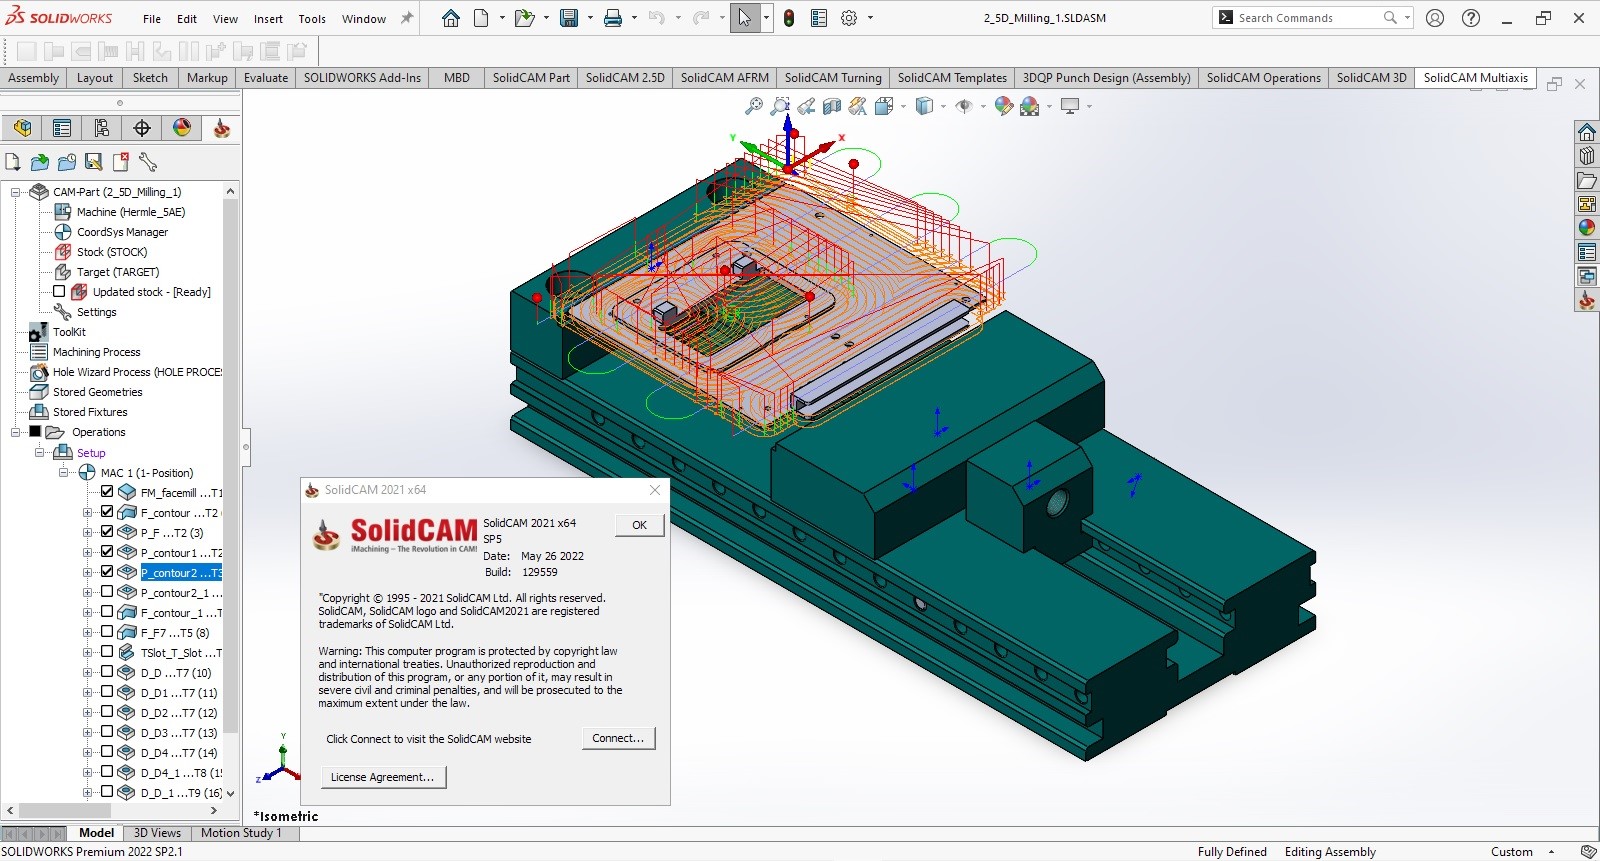 Working with SolidCAM 2021 SP5 full